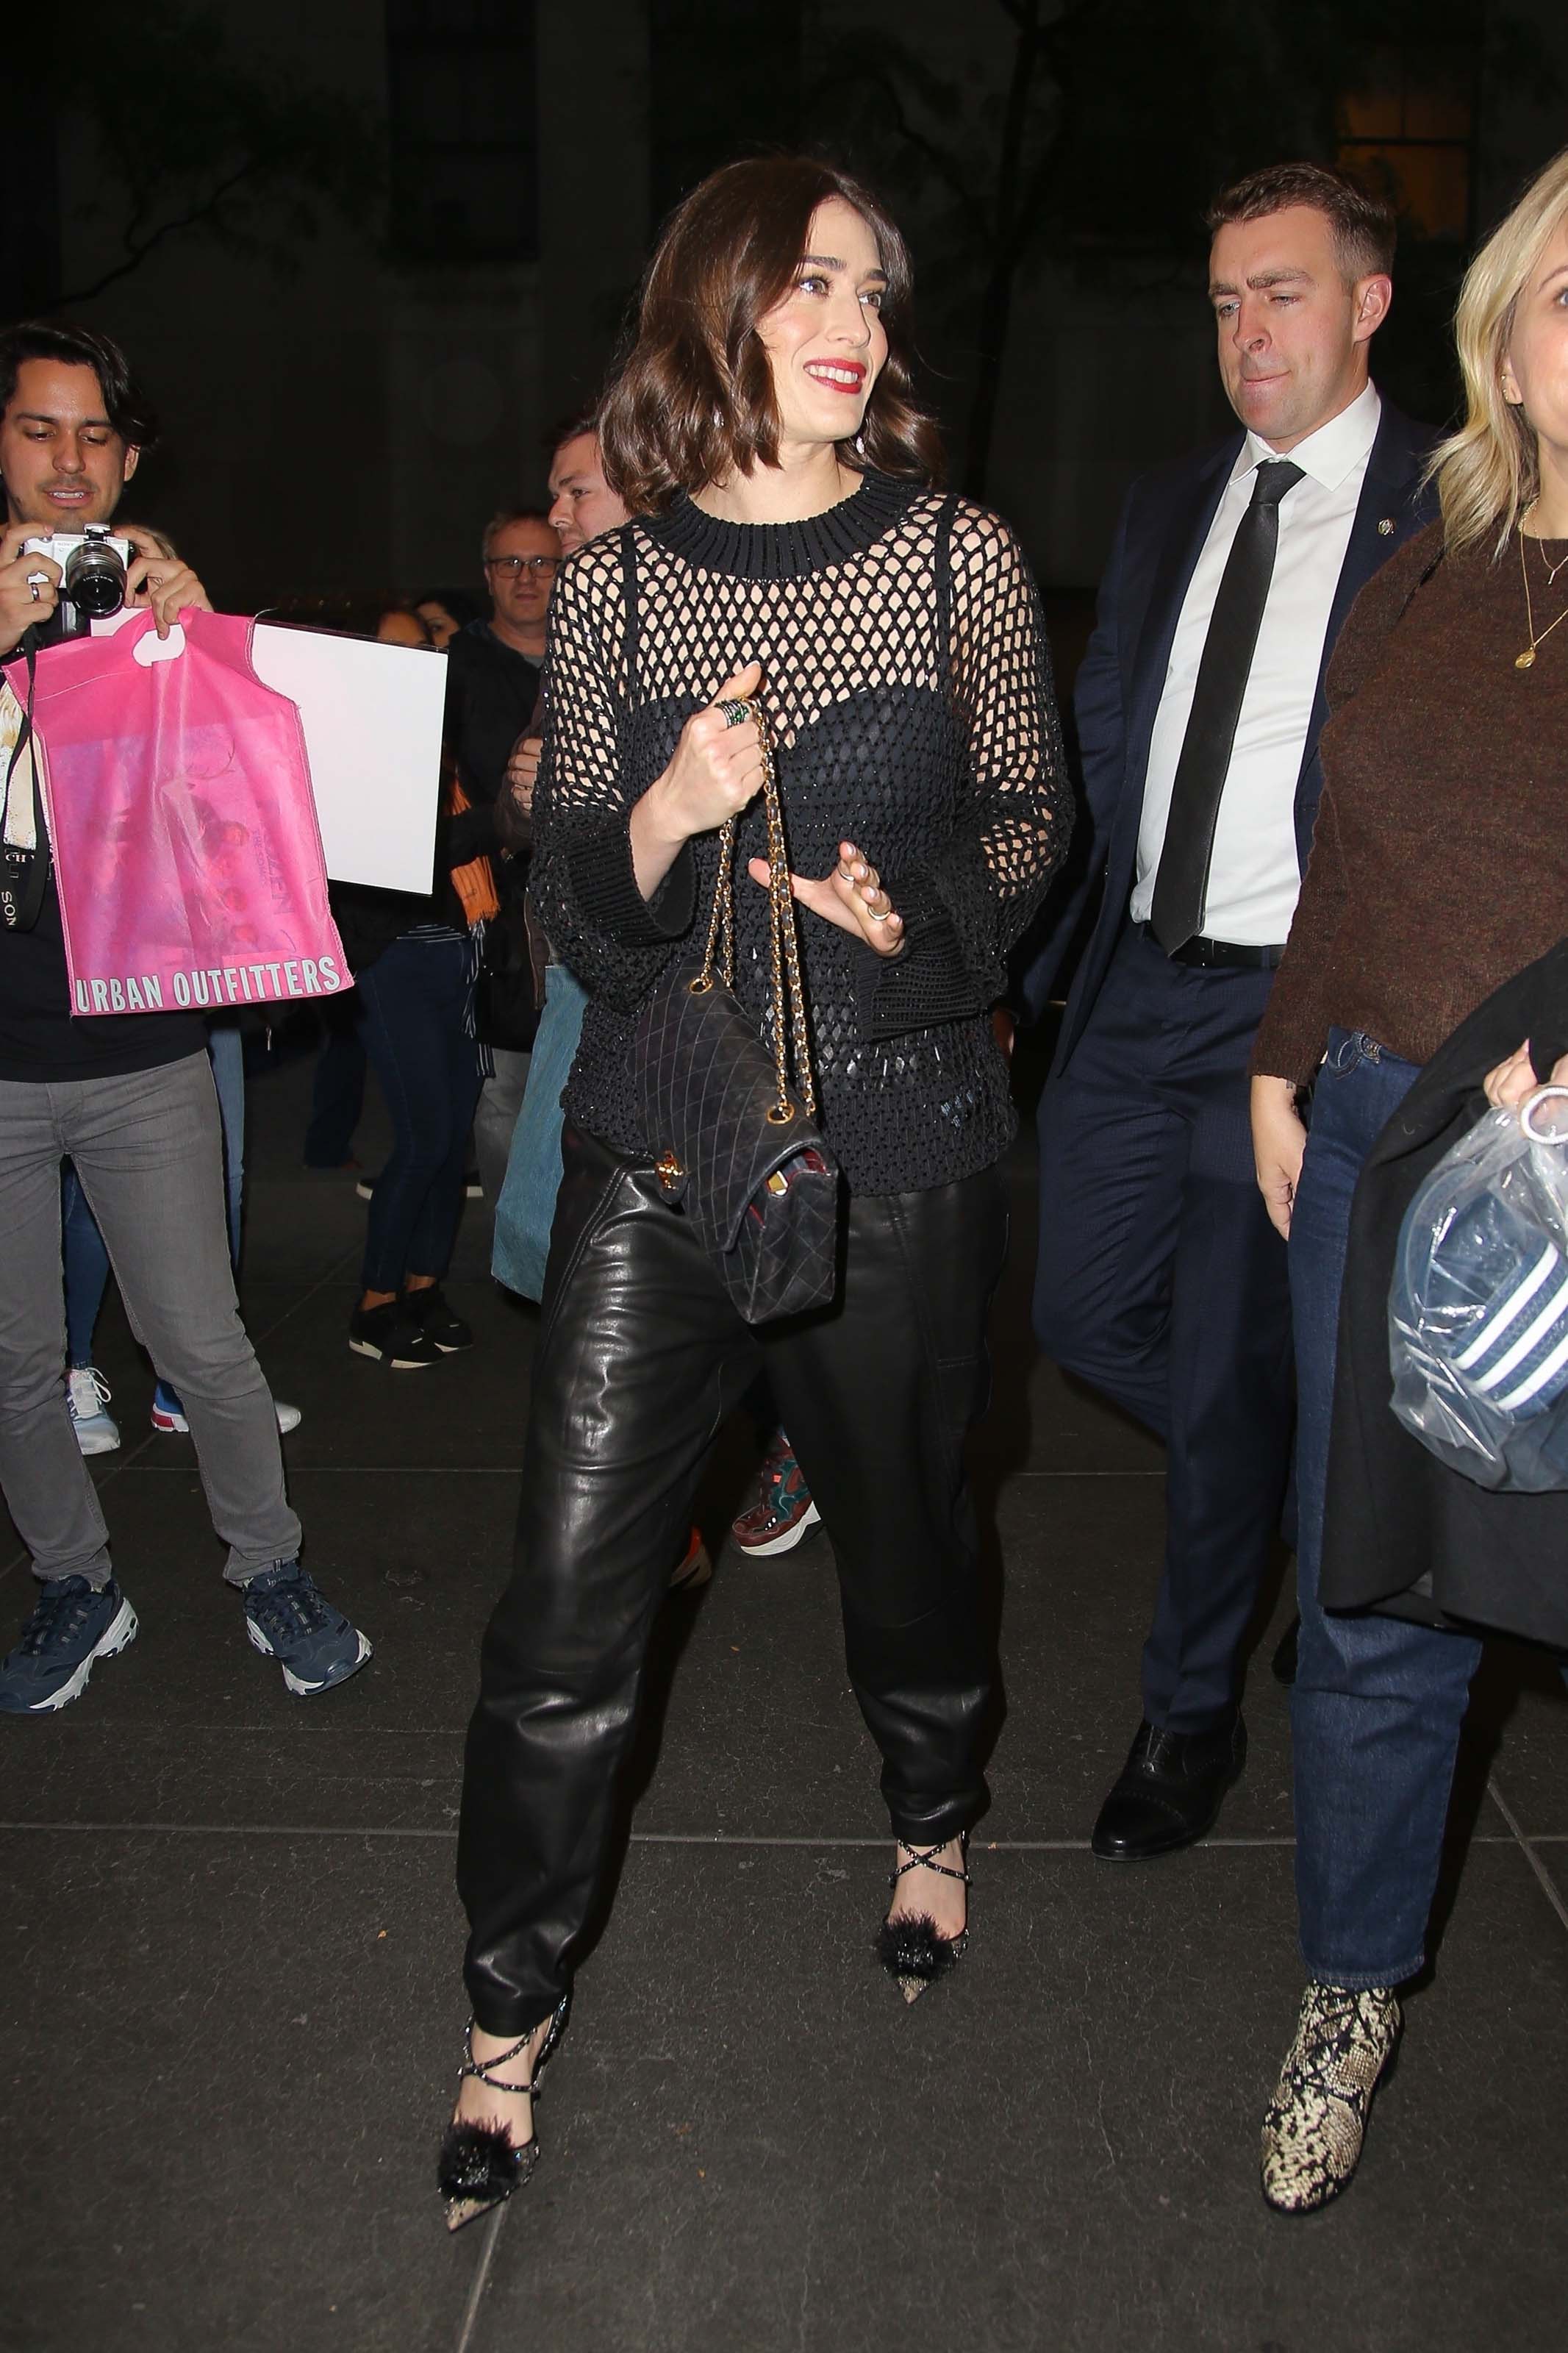 Lizzy Caplan looks stylish in a leather pants